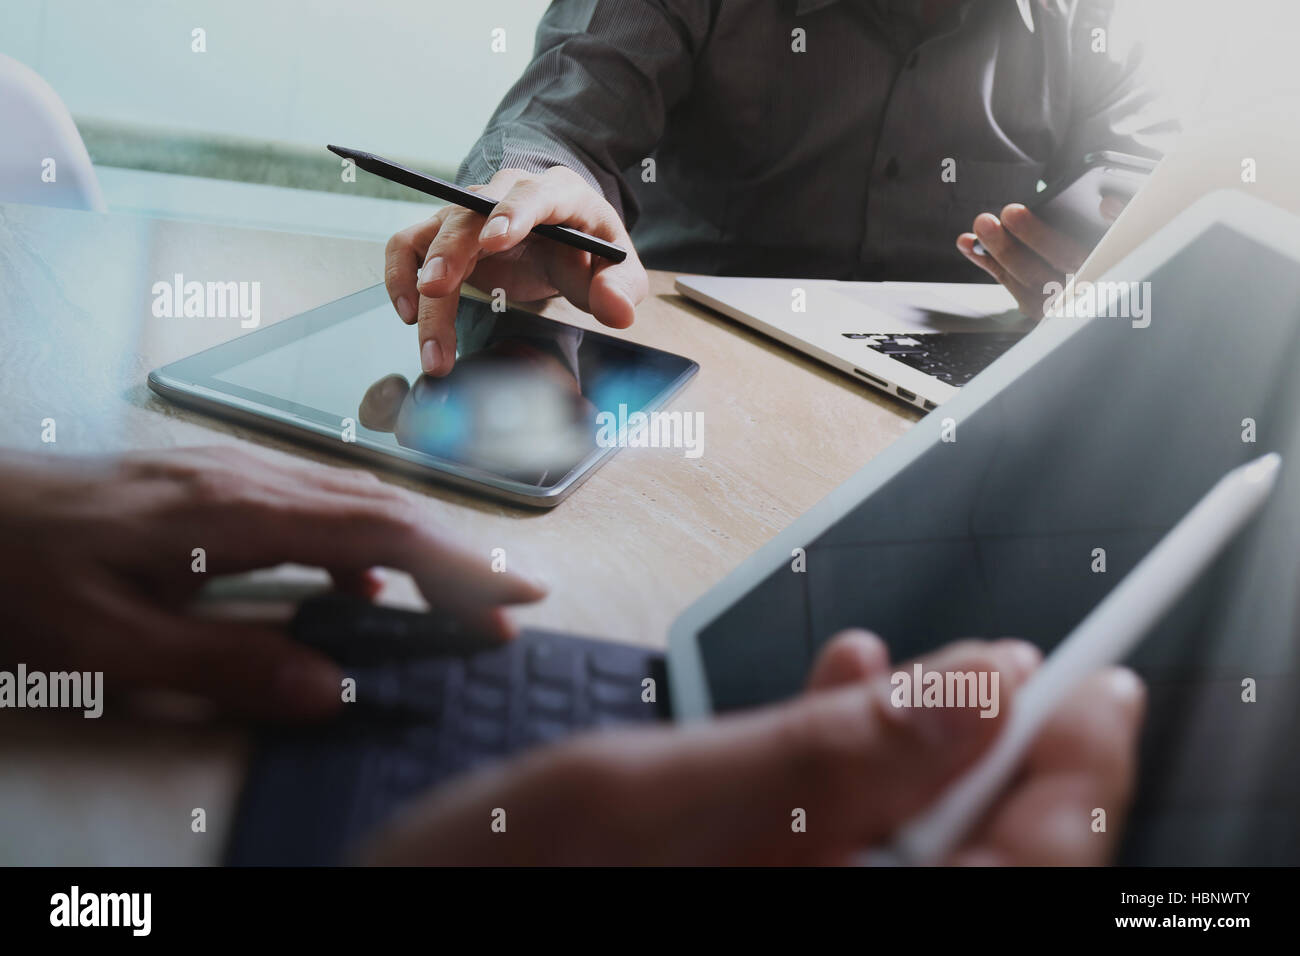 Business team meeting present. Photo professional investor working with new startup project. Finance managers meeting.Digital tablet laptop computer d Stock Photo